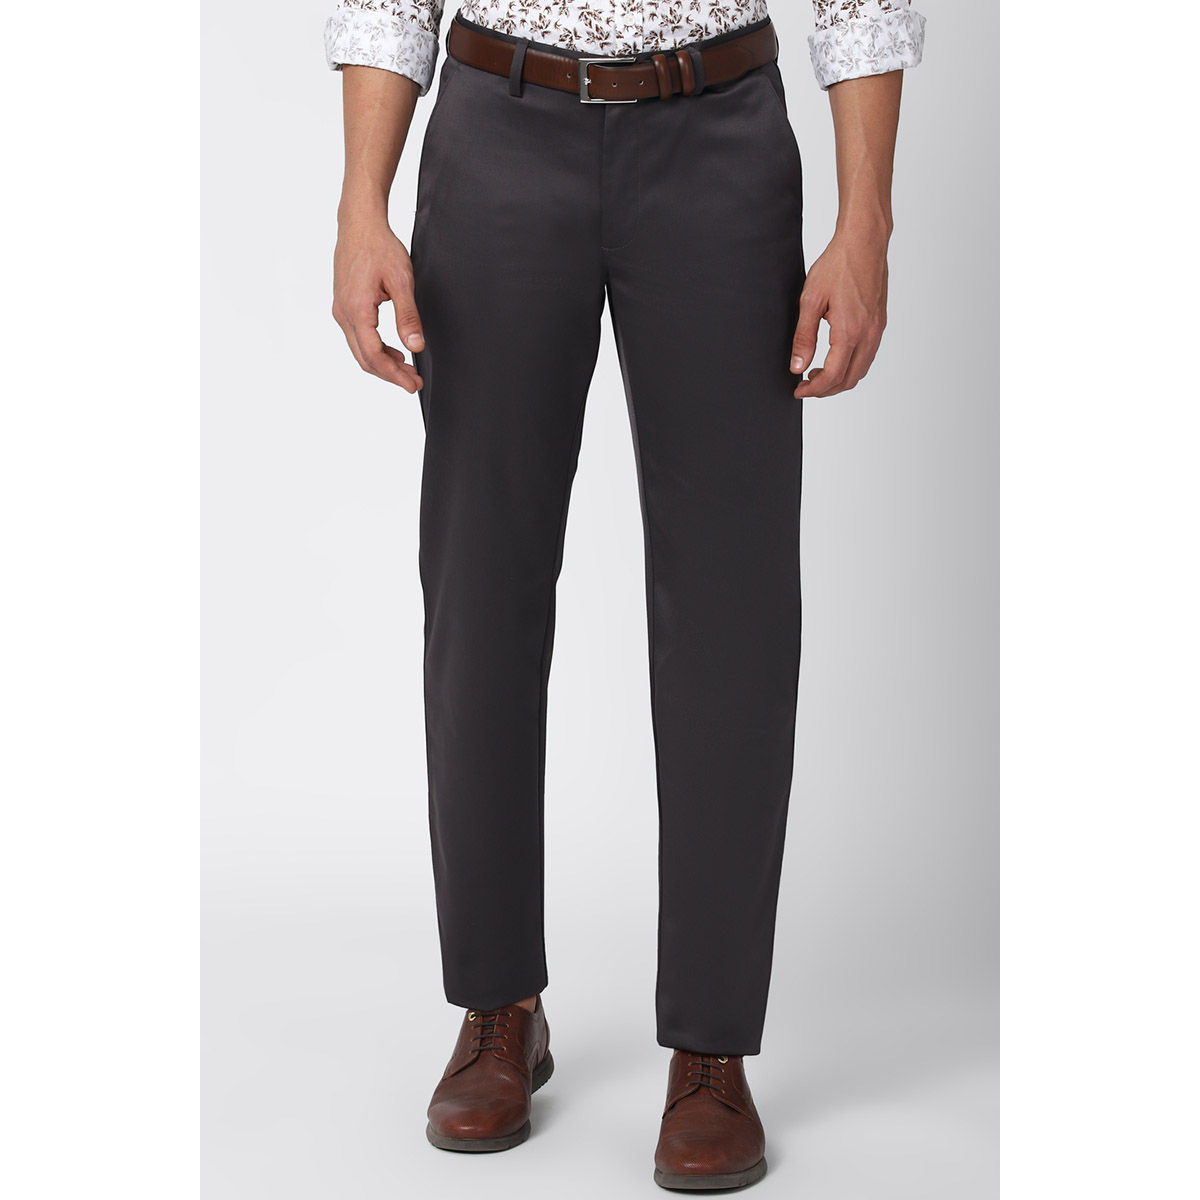 Peter England Men Grey Casual Trouser Buy Peter England Men Grey Casual  Trouser Online at Best Price in India  NykaaMan